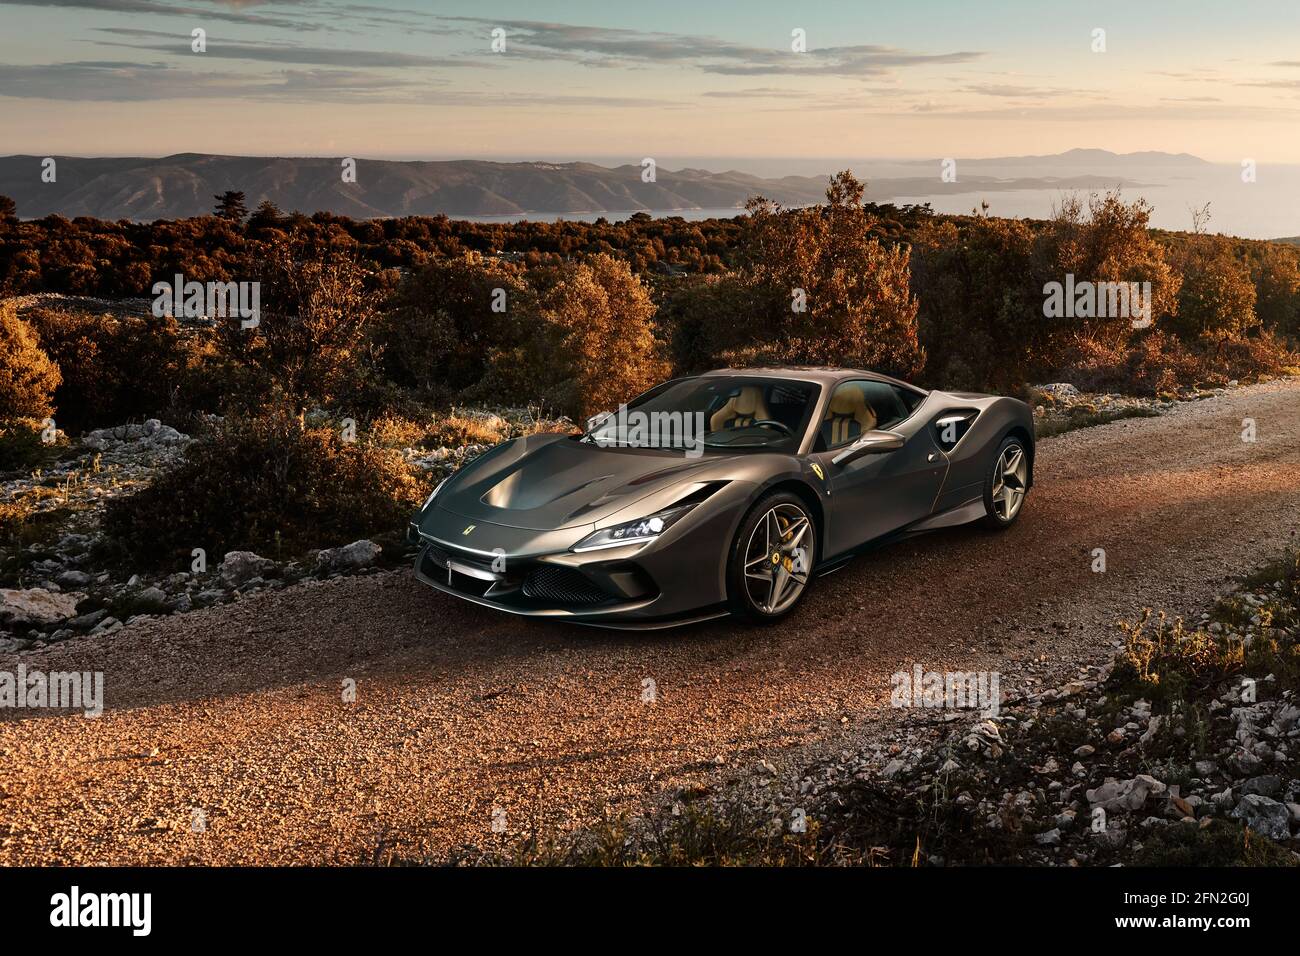 Katowice/Poland - 06.14.2019: Ferrari F8 Tributo on a gravel road on the island of Brac in Croatia. In the background there is a view of the Adriatic Stock Photo